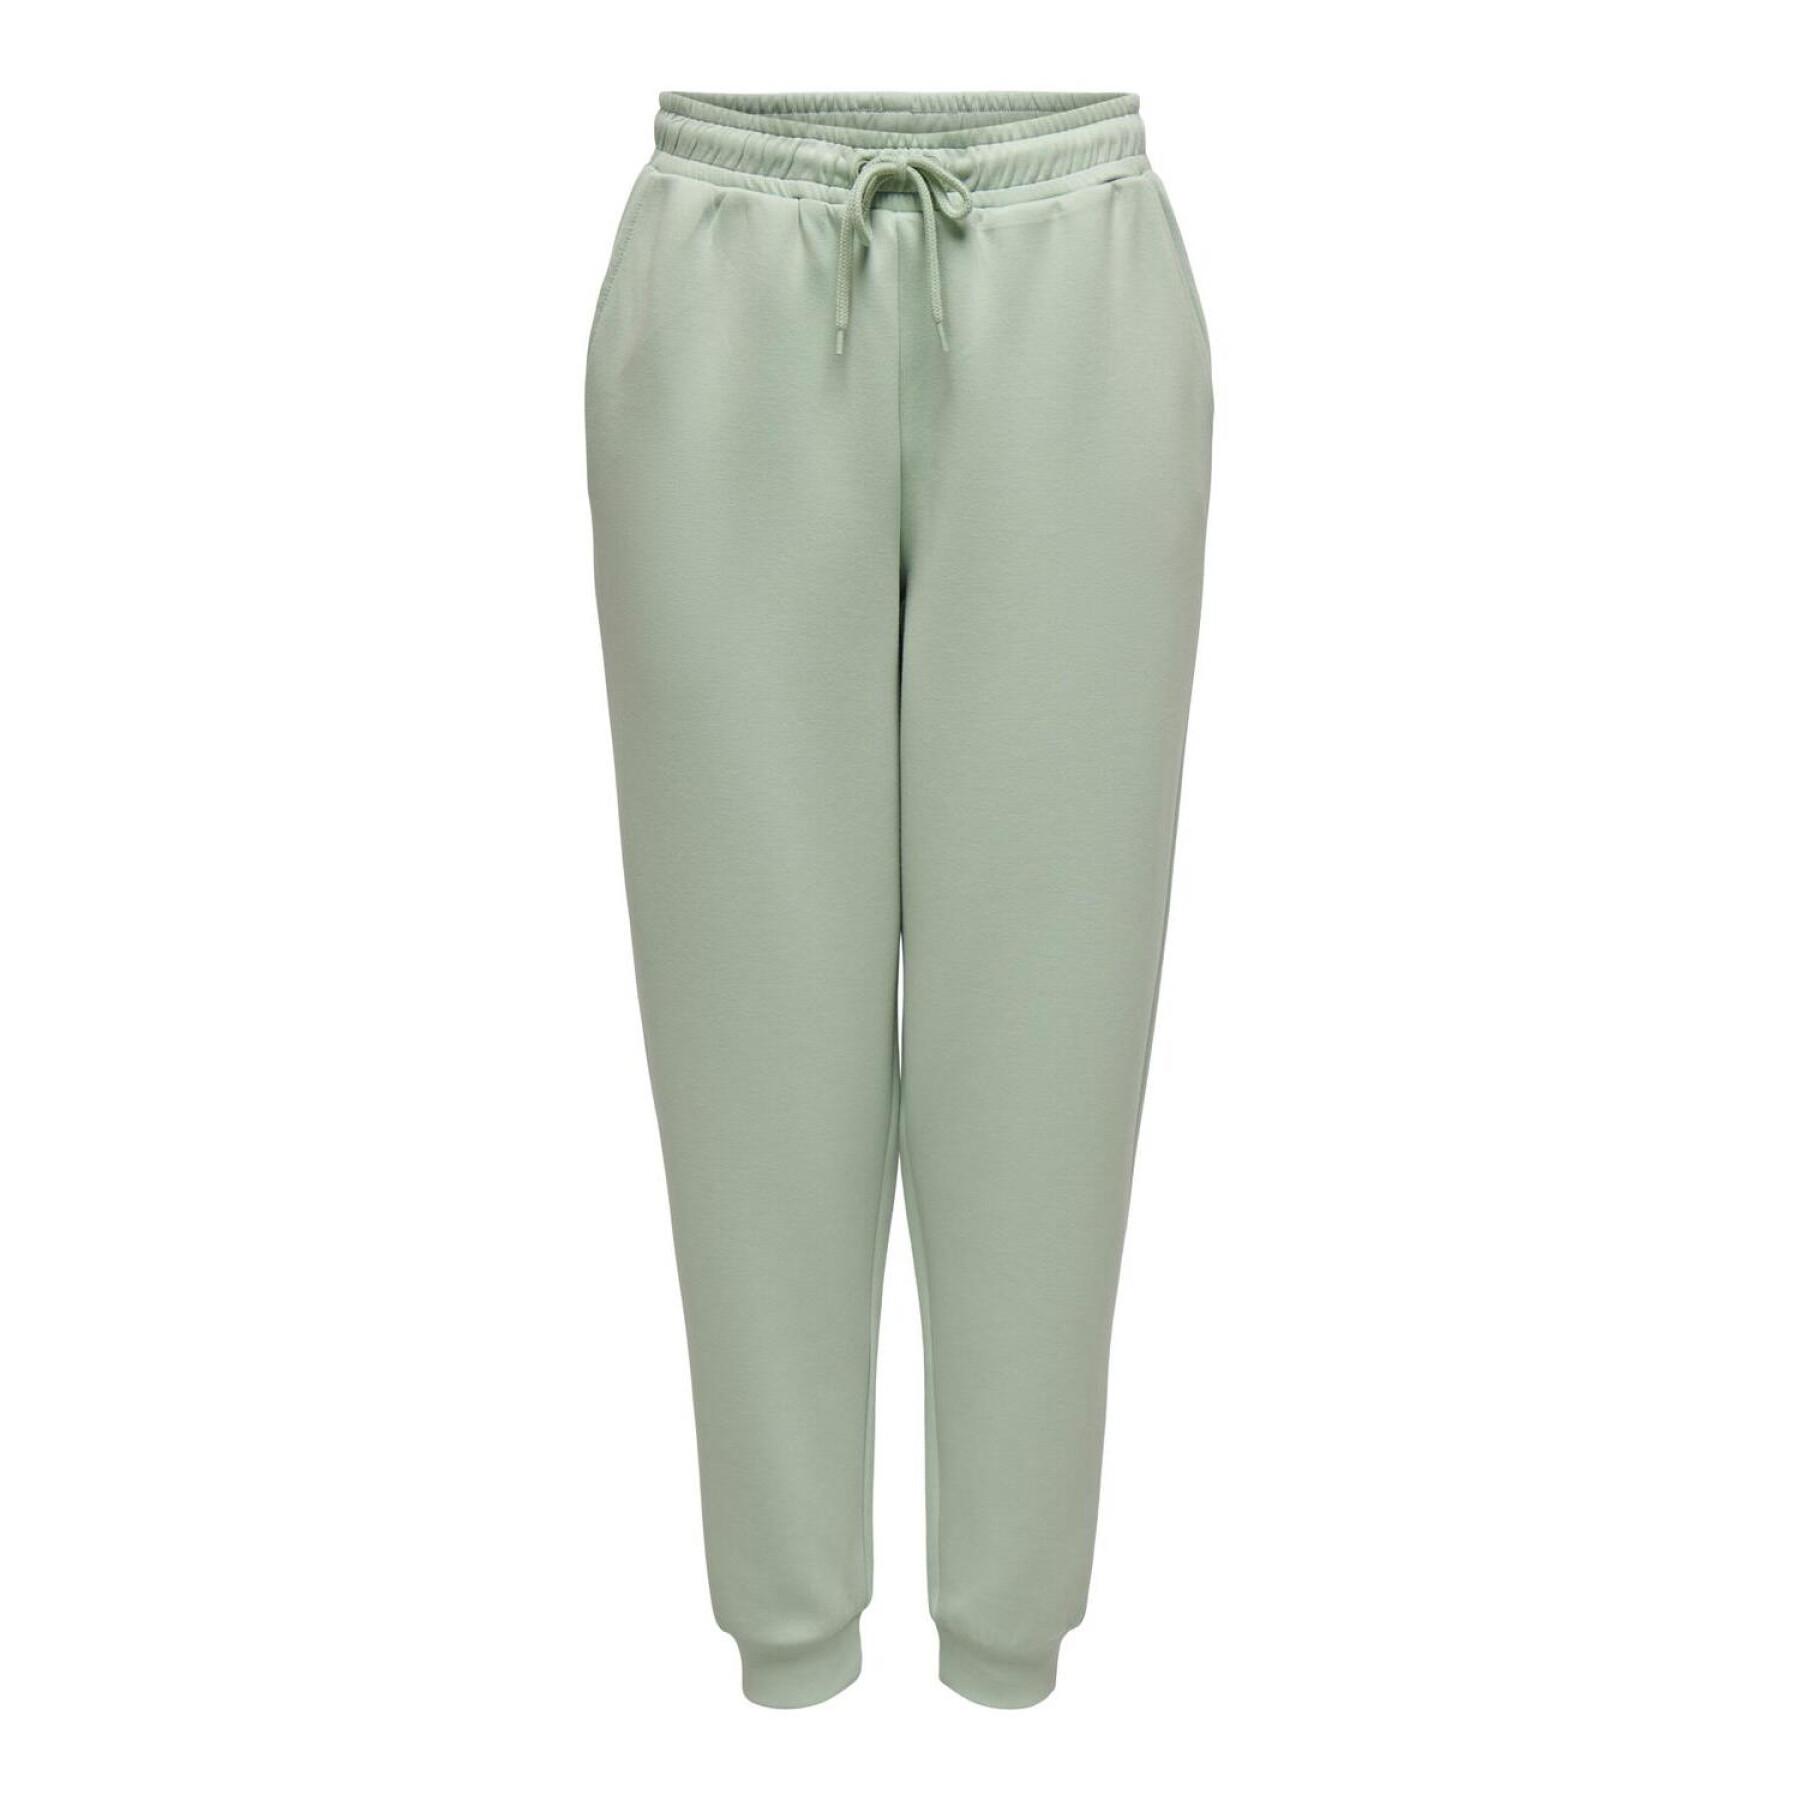 Jogginghose mit hoher Taille, Damen Only play Lounge